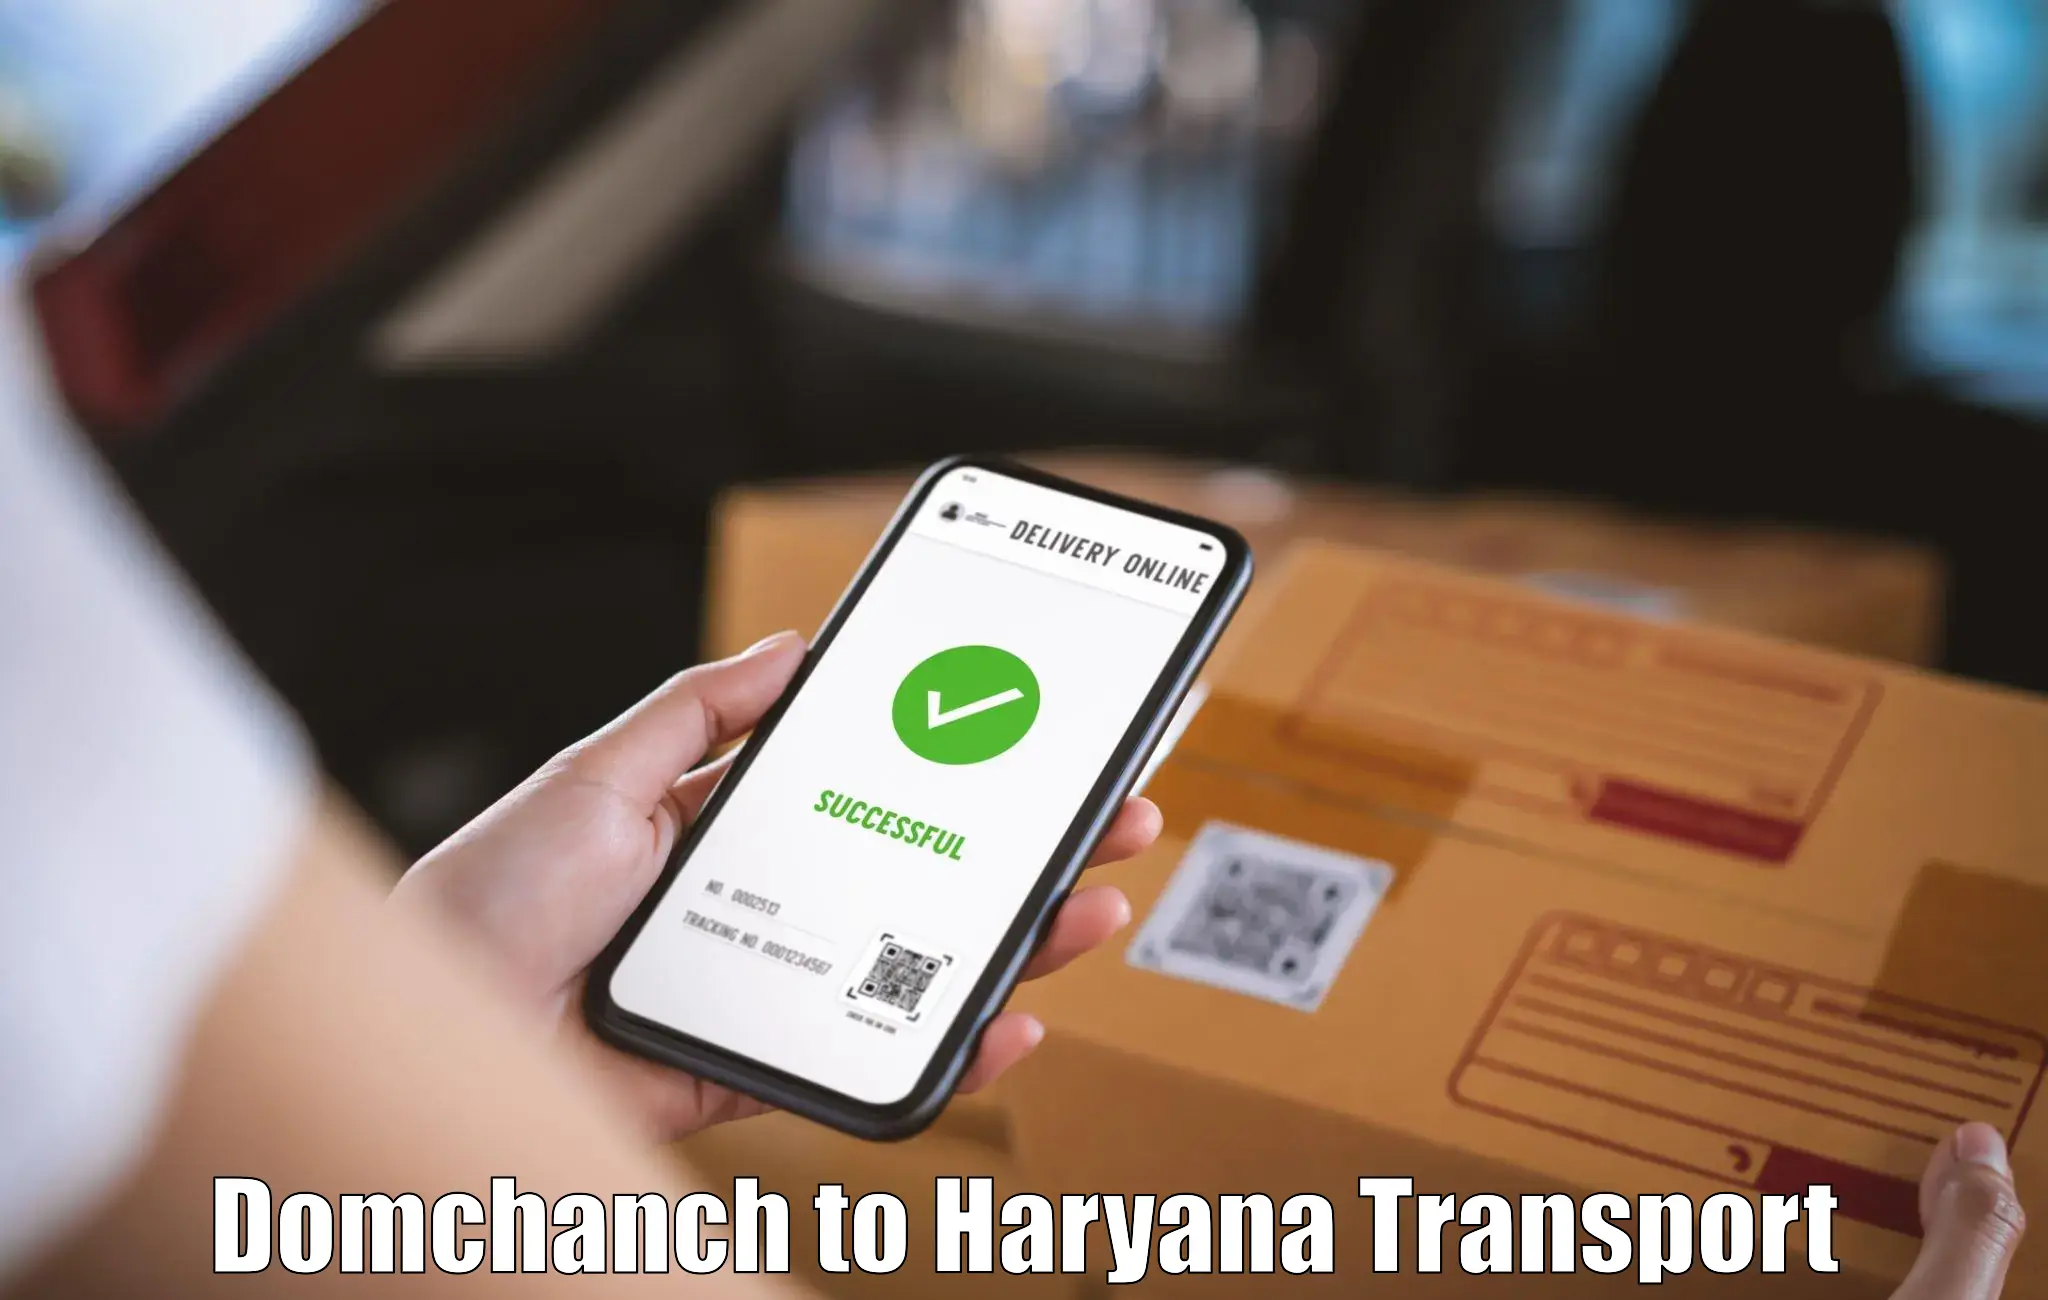 Express transport services Domchanch to Chaudhary Charan Singh Haryana Agricultural University Hisar